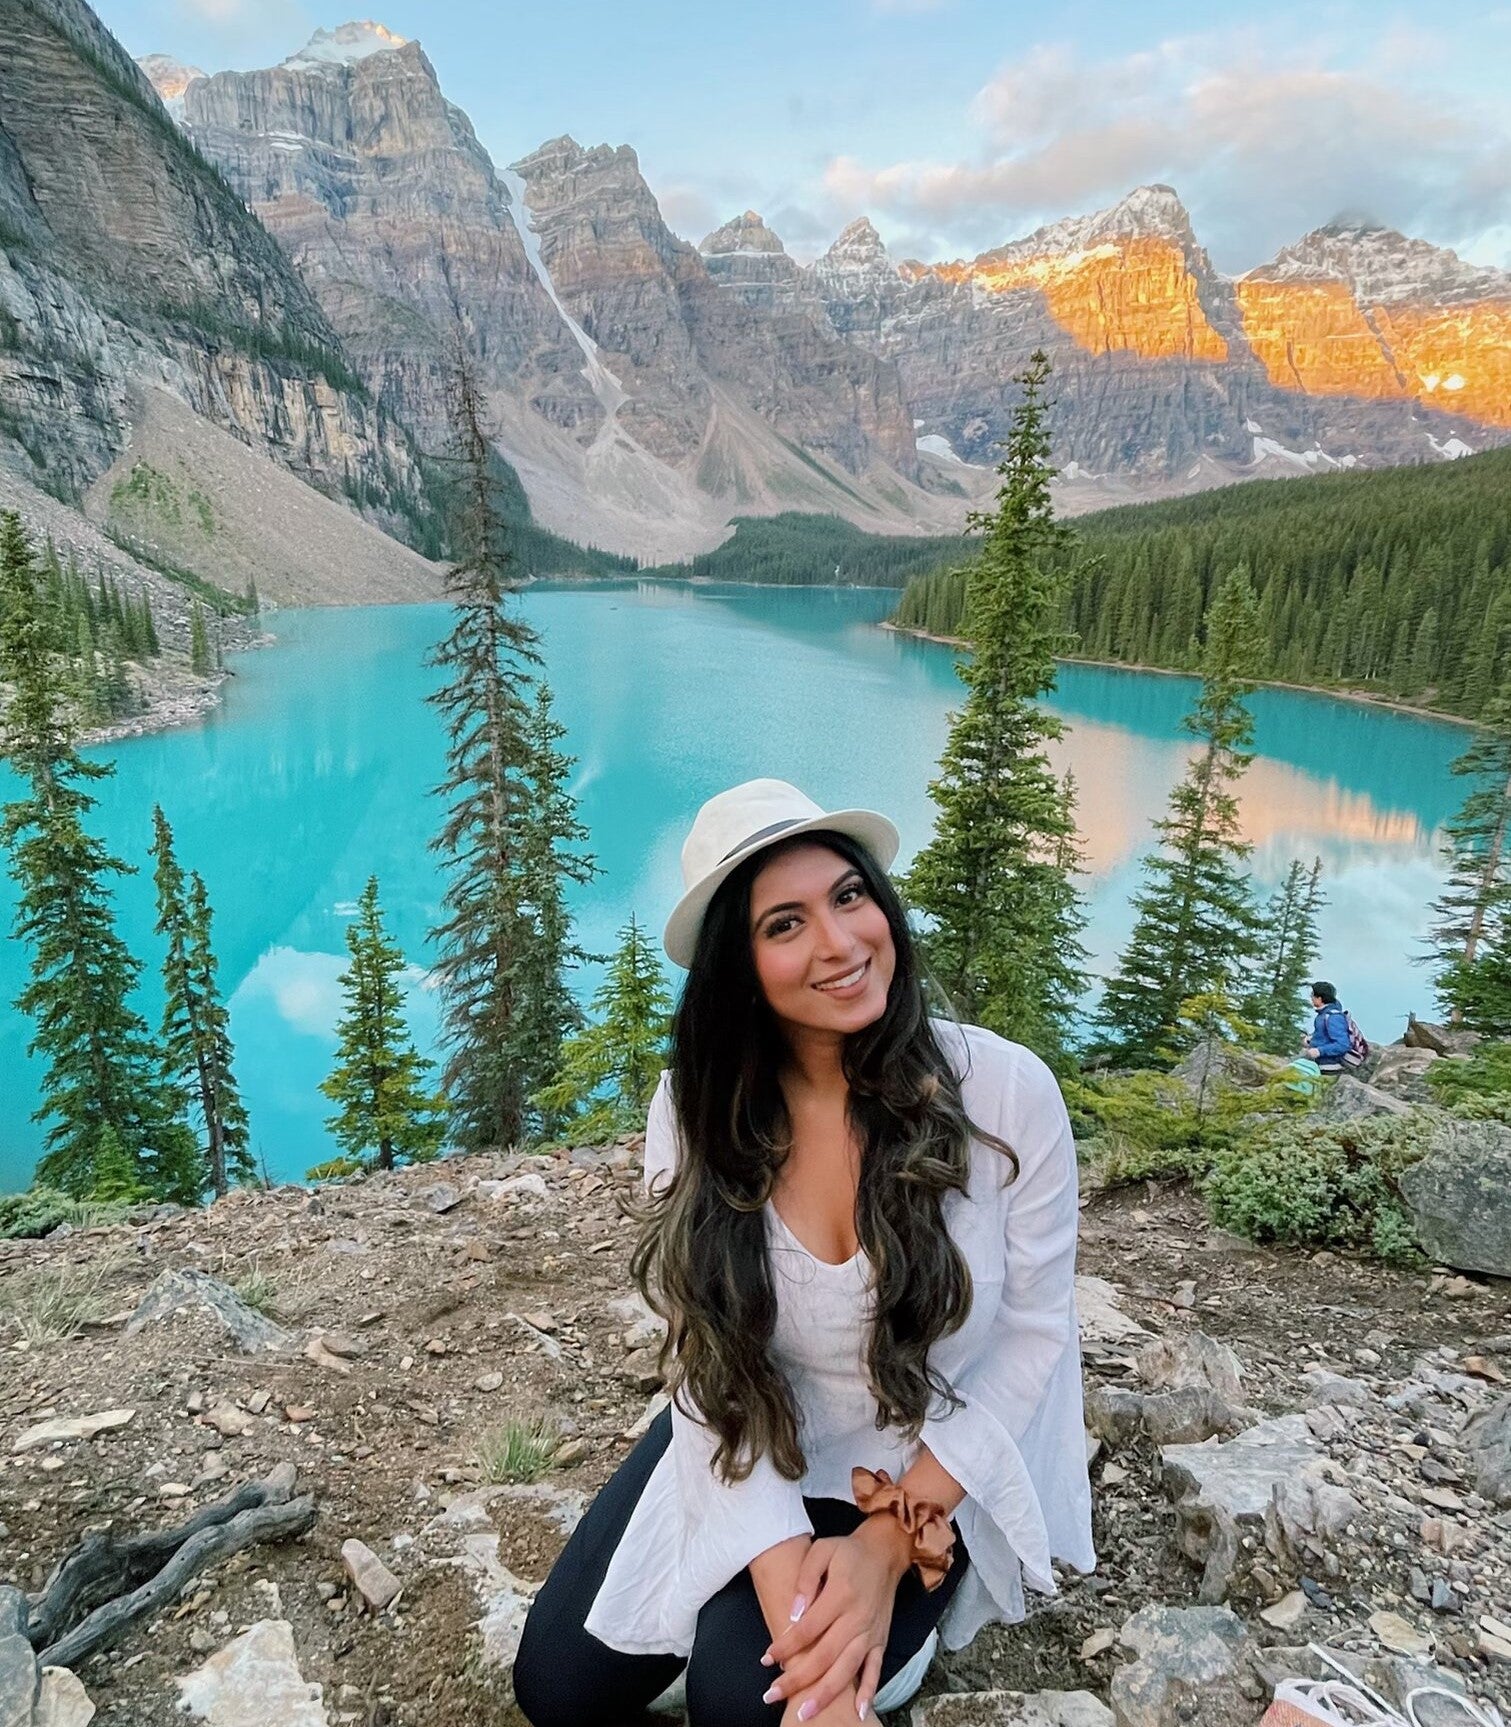 A photo of Rashmi smiling while sitting outside on the ground, with pine trees, water, and mountains in the background.